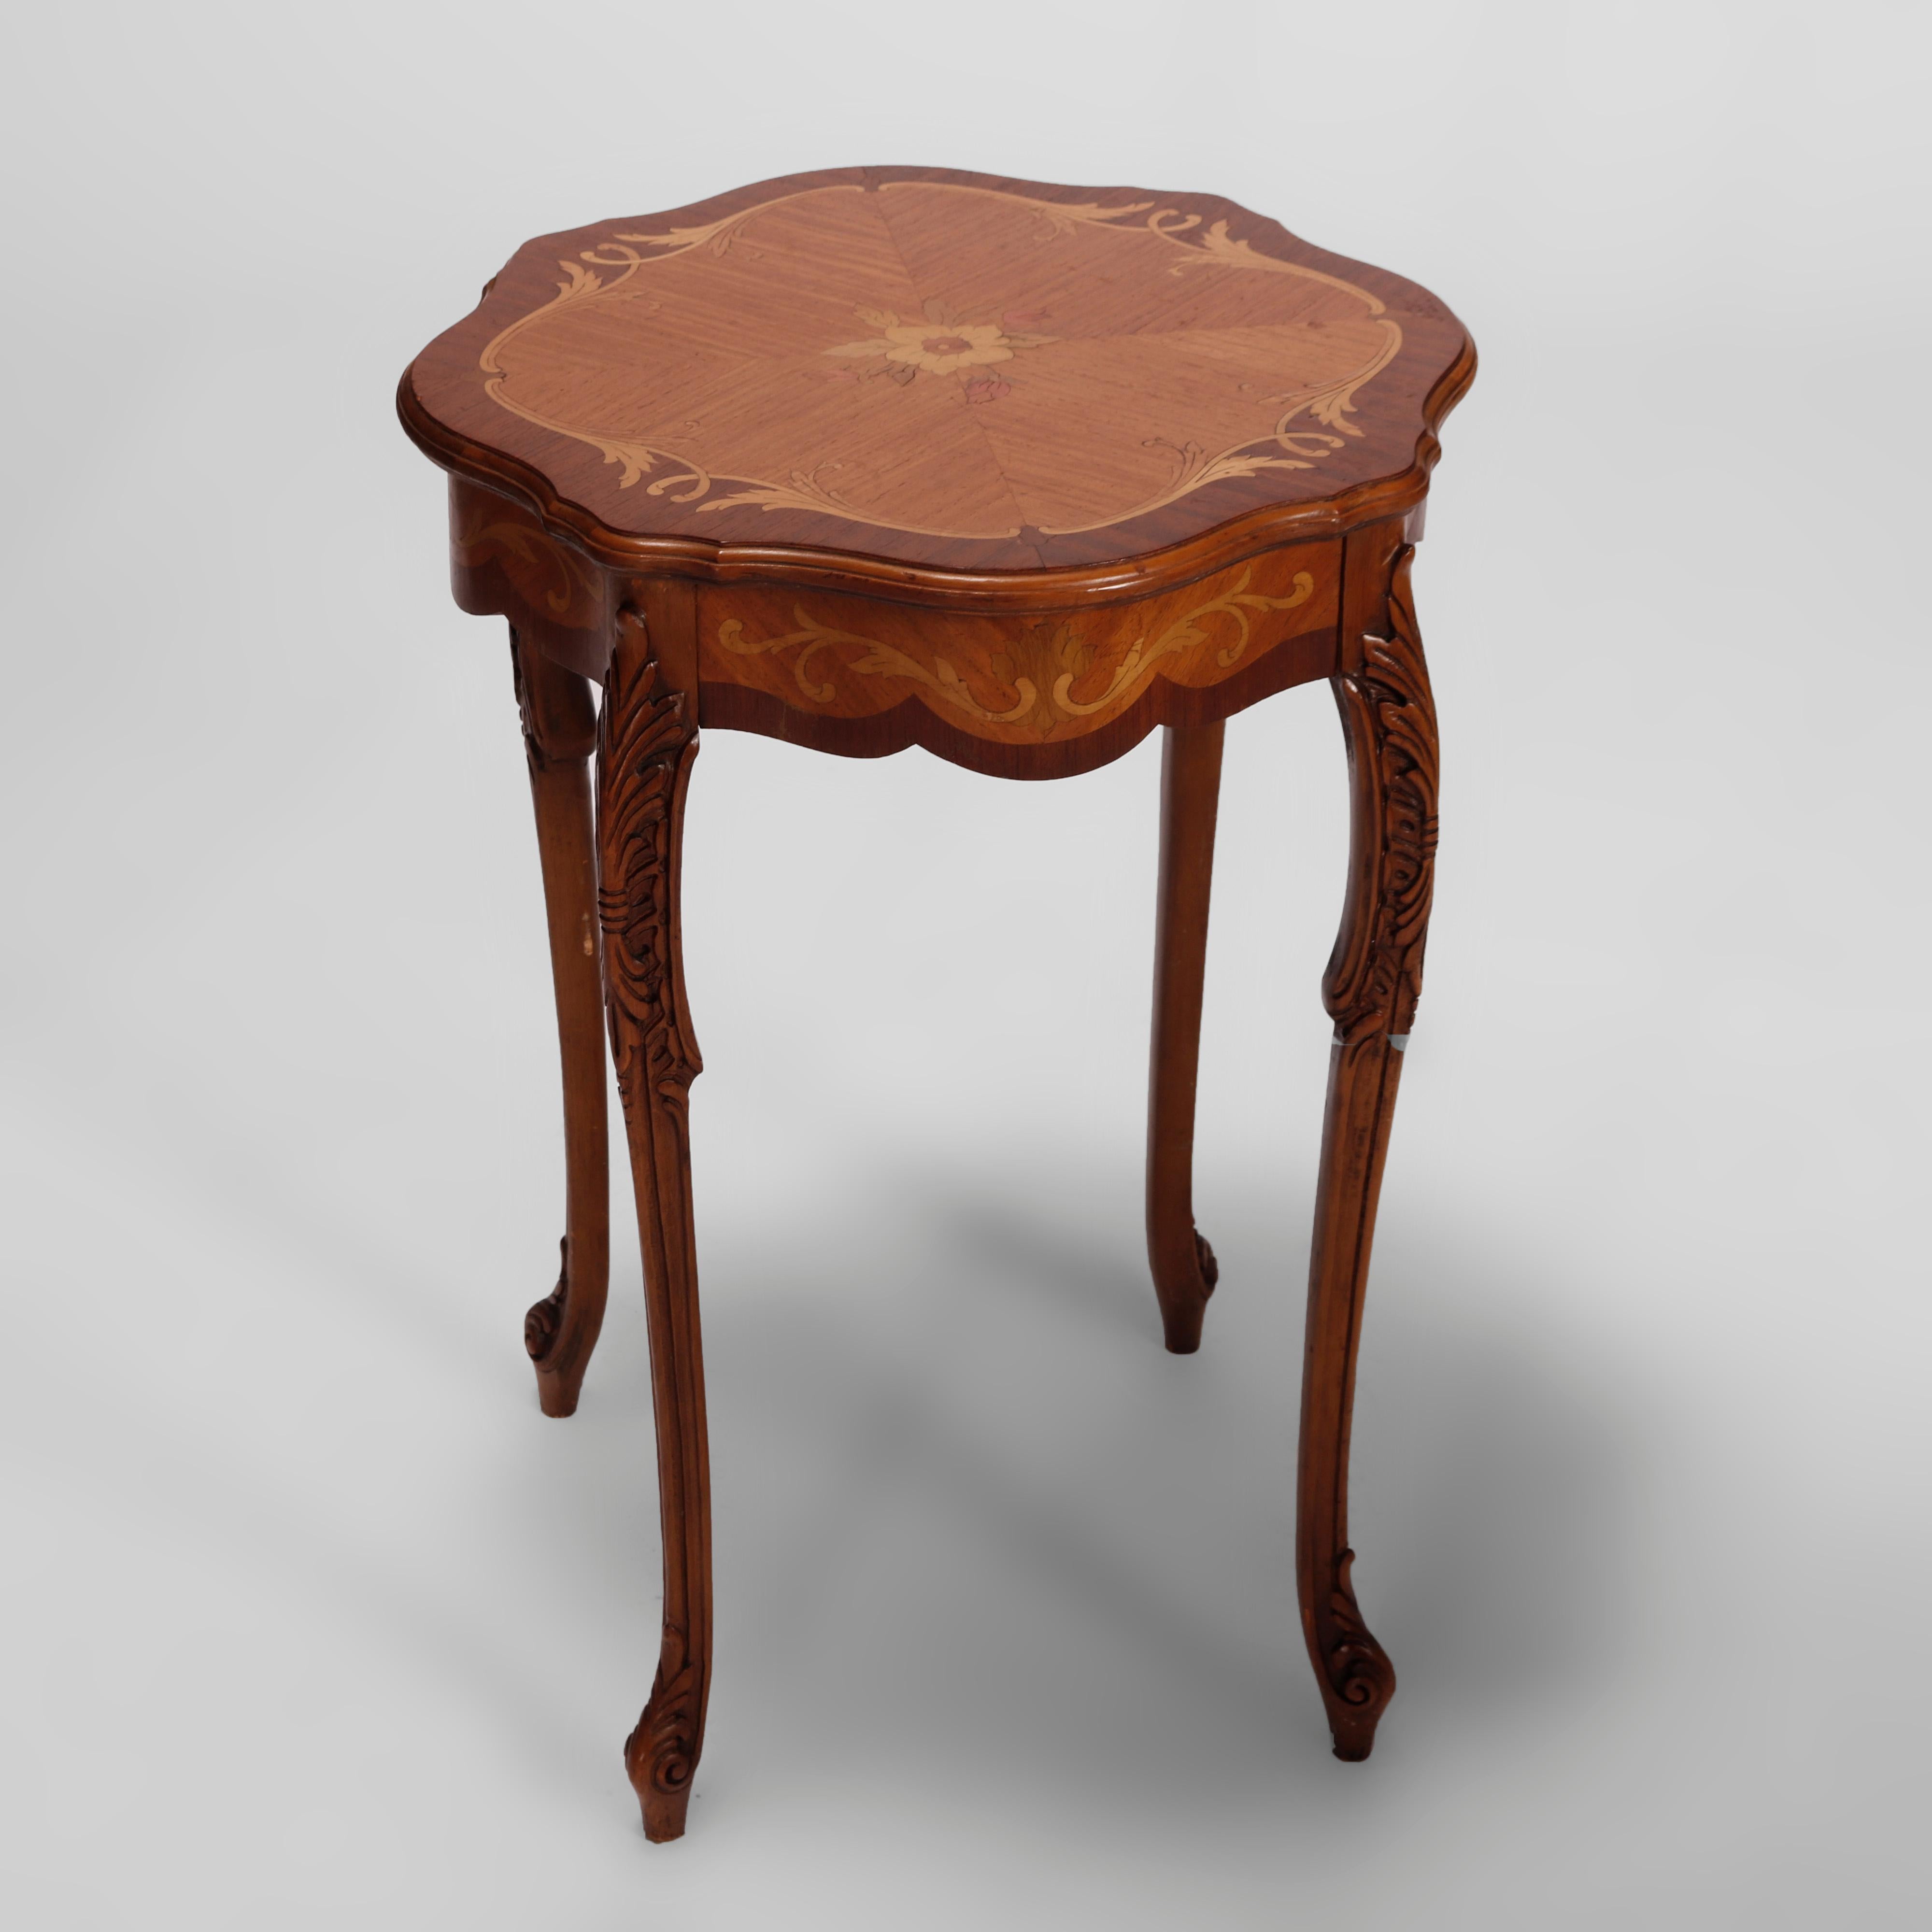 20th Century Antique French Carved Mahogany Satinwood Inlaid Marquetry Side Tables c1930